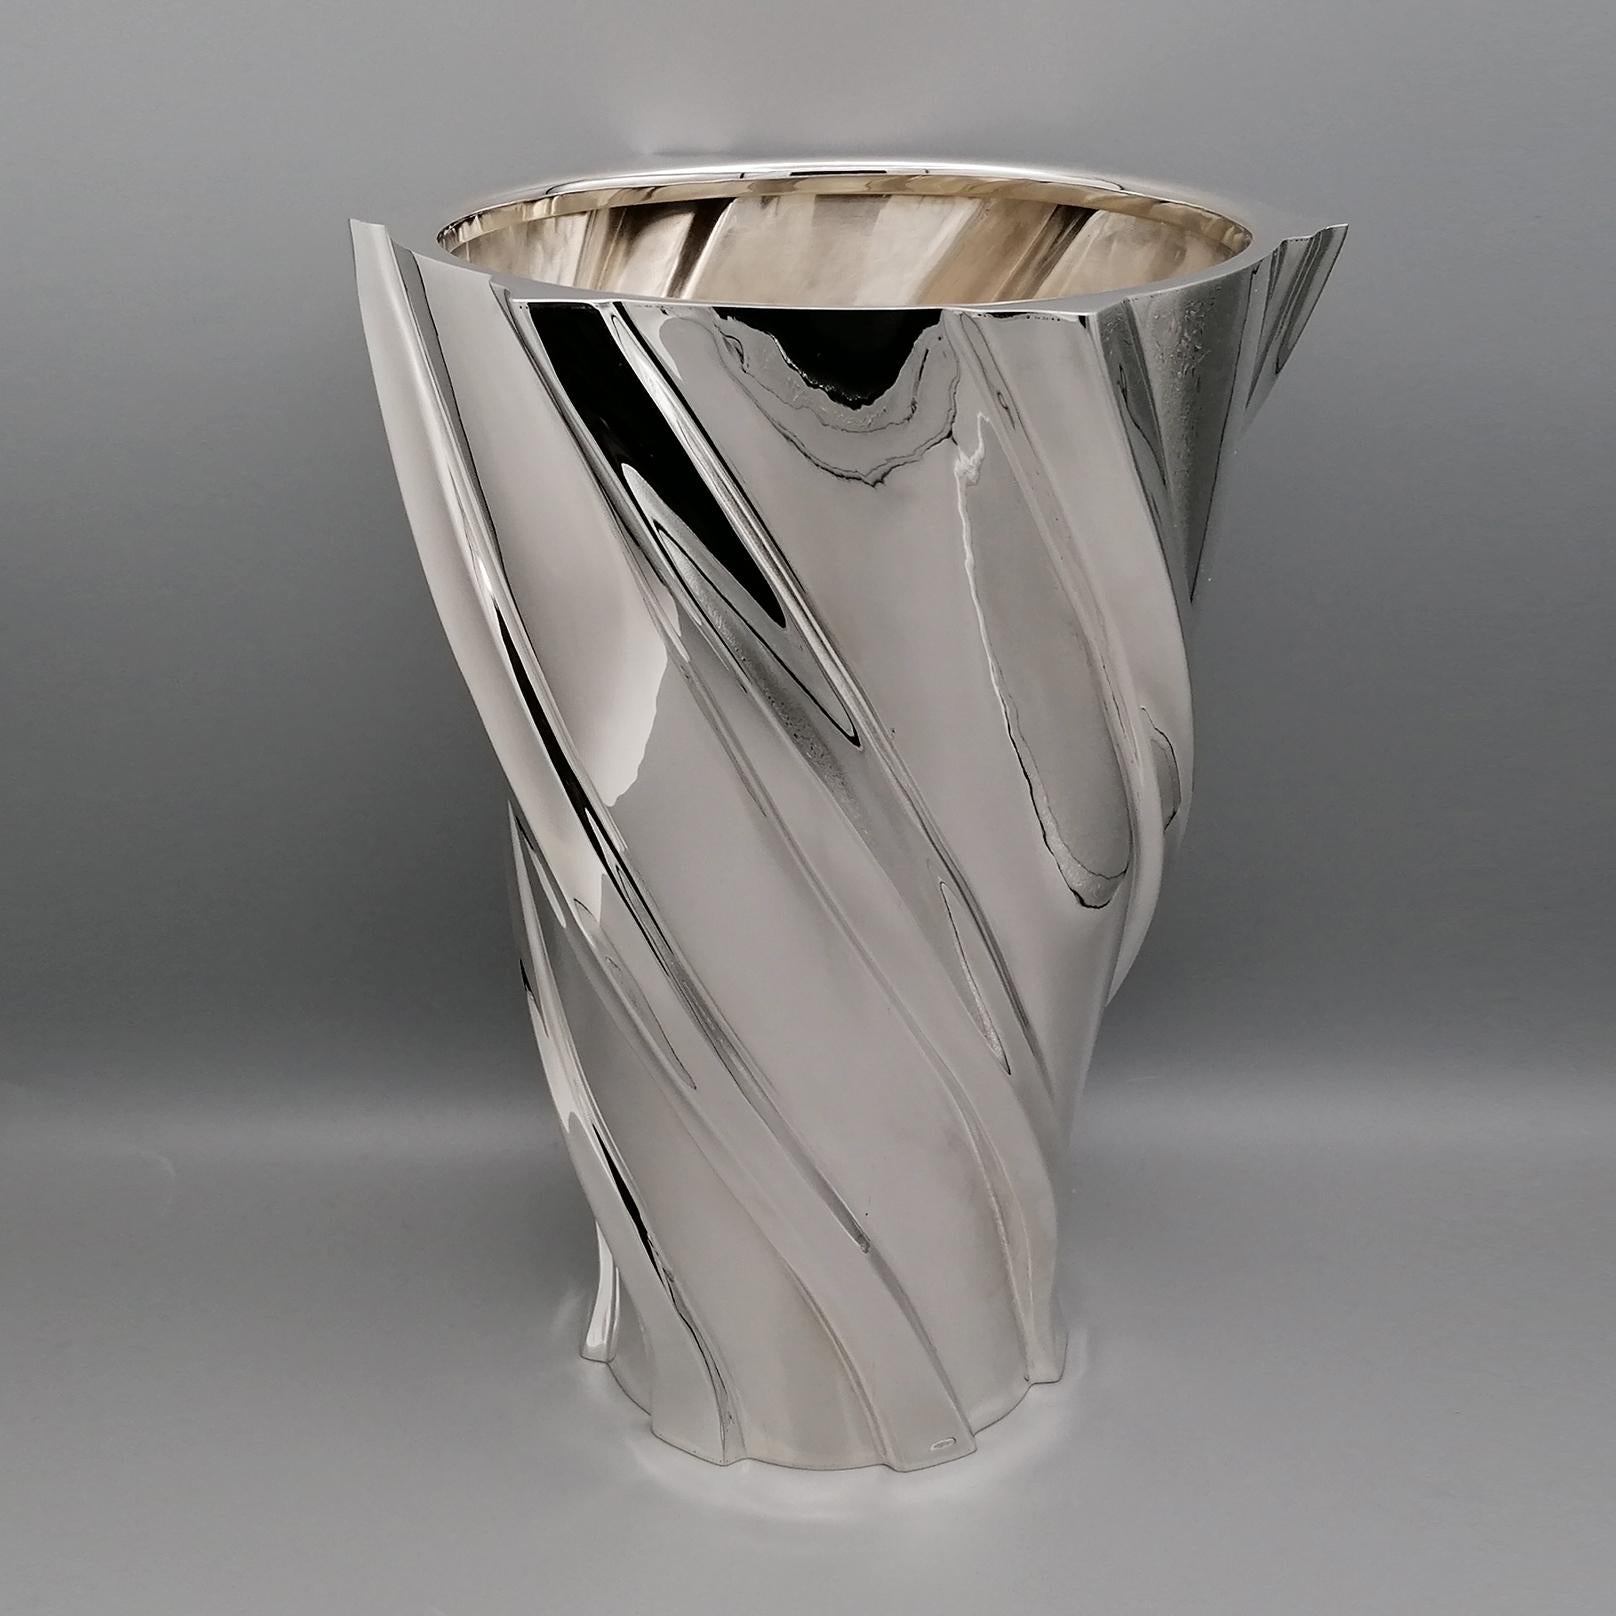 Sterling silver vase, completely handmade starting from a silver sheet.
The shape of the body is conical.
The base, shaped, is cm. 12.5 (4.92 in.) and extends in size to the top of the 